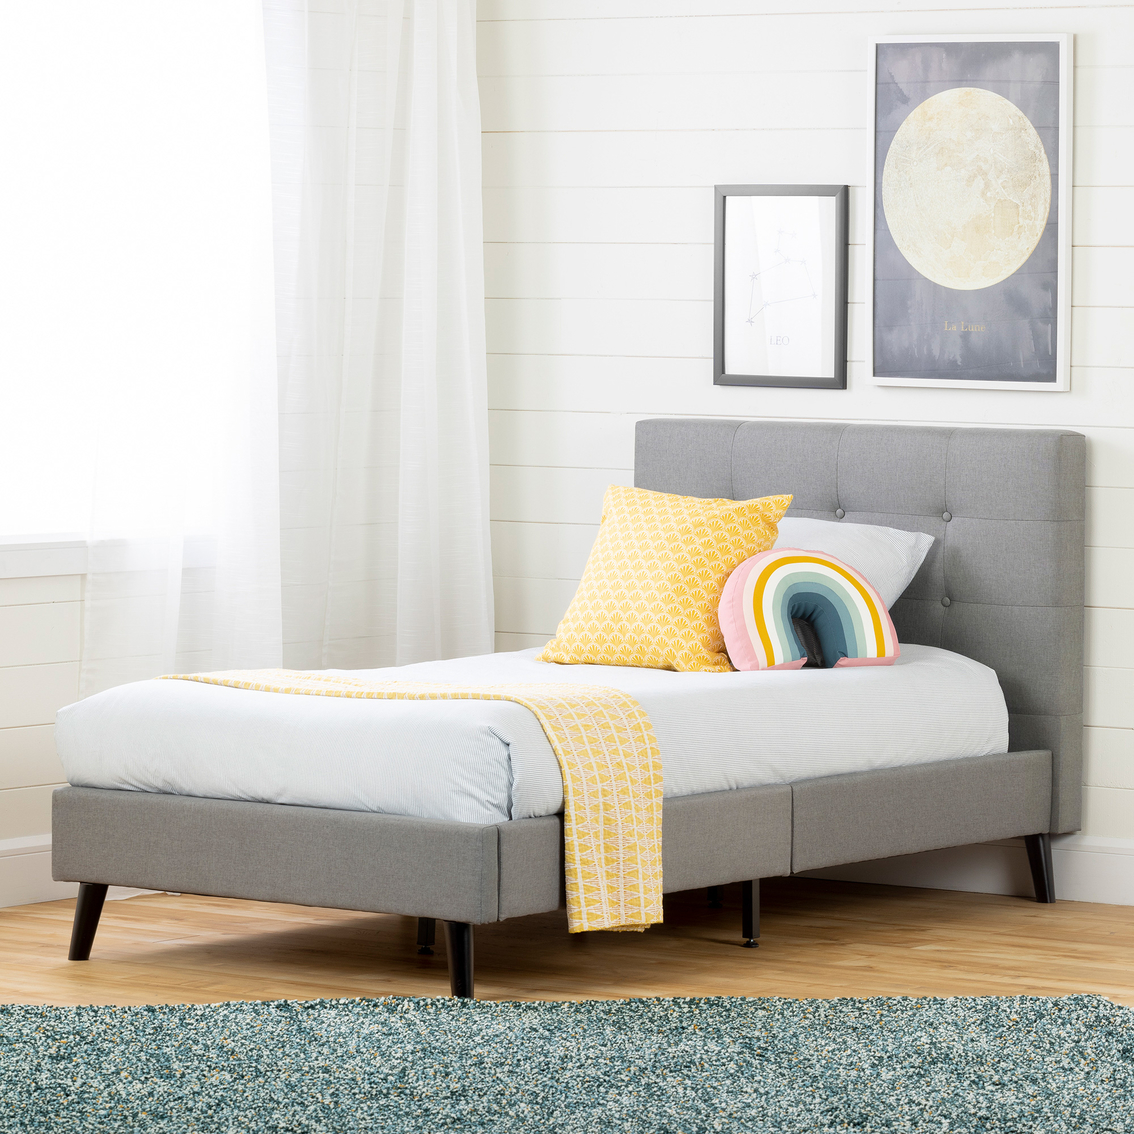 South Shore Fusion Complete Upholstered Bed - Image 2 of 8